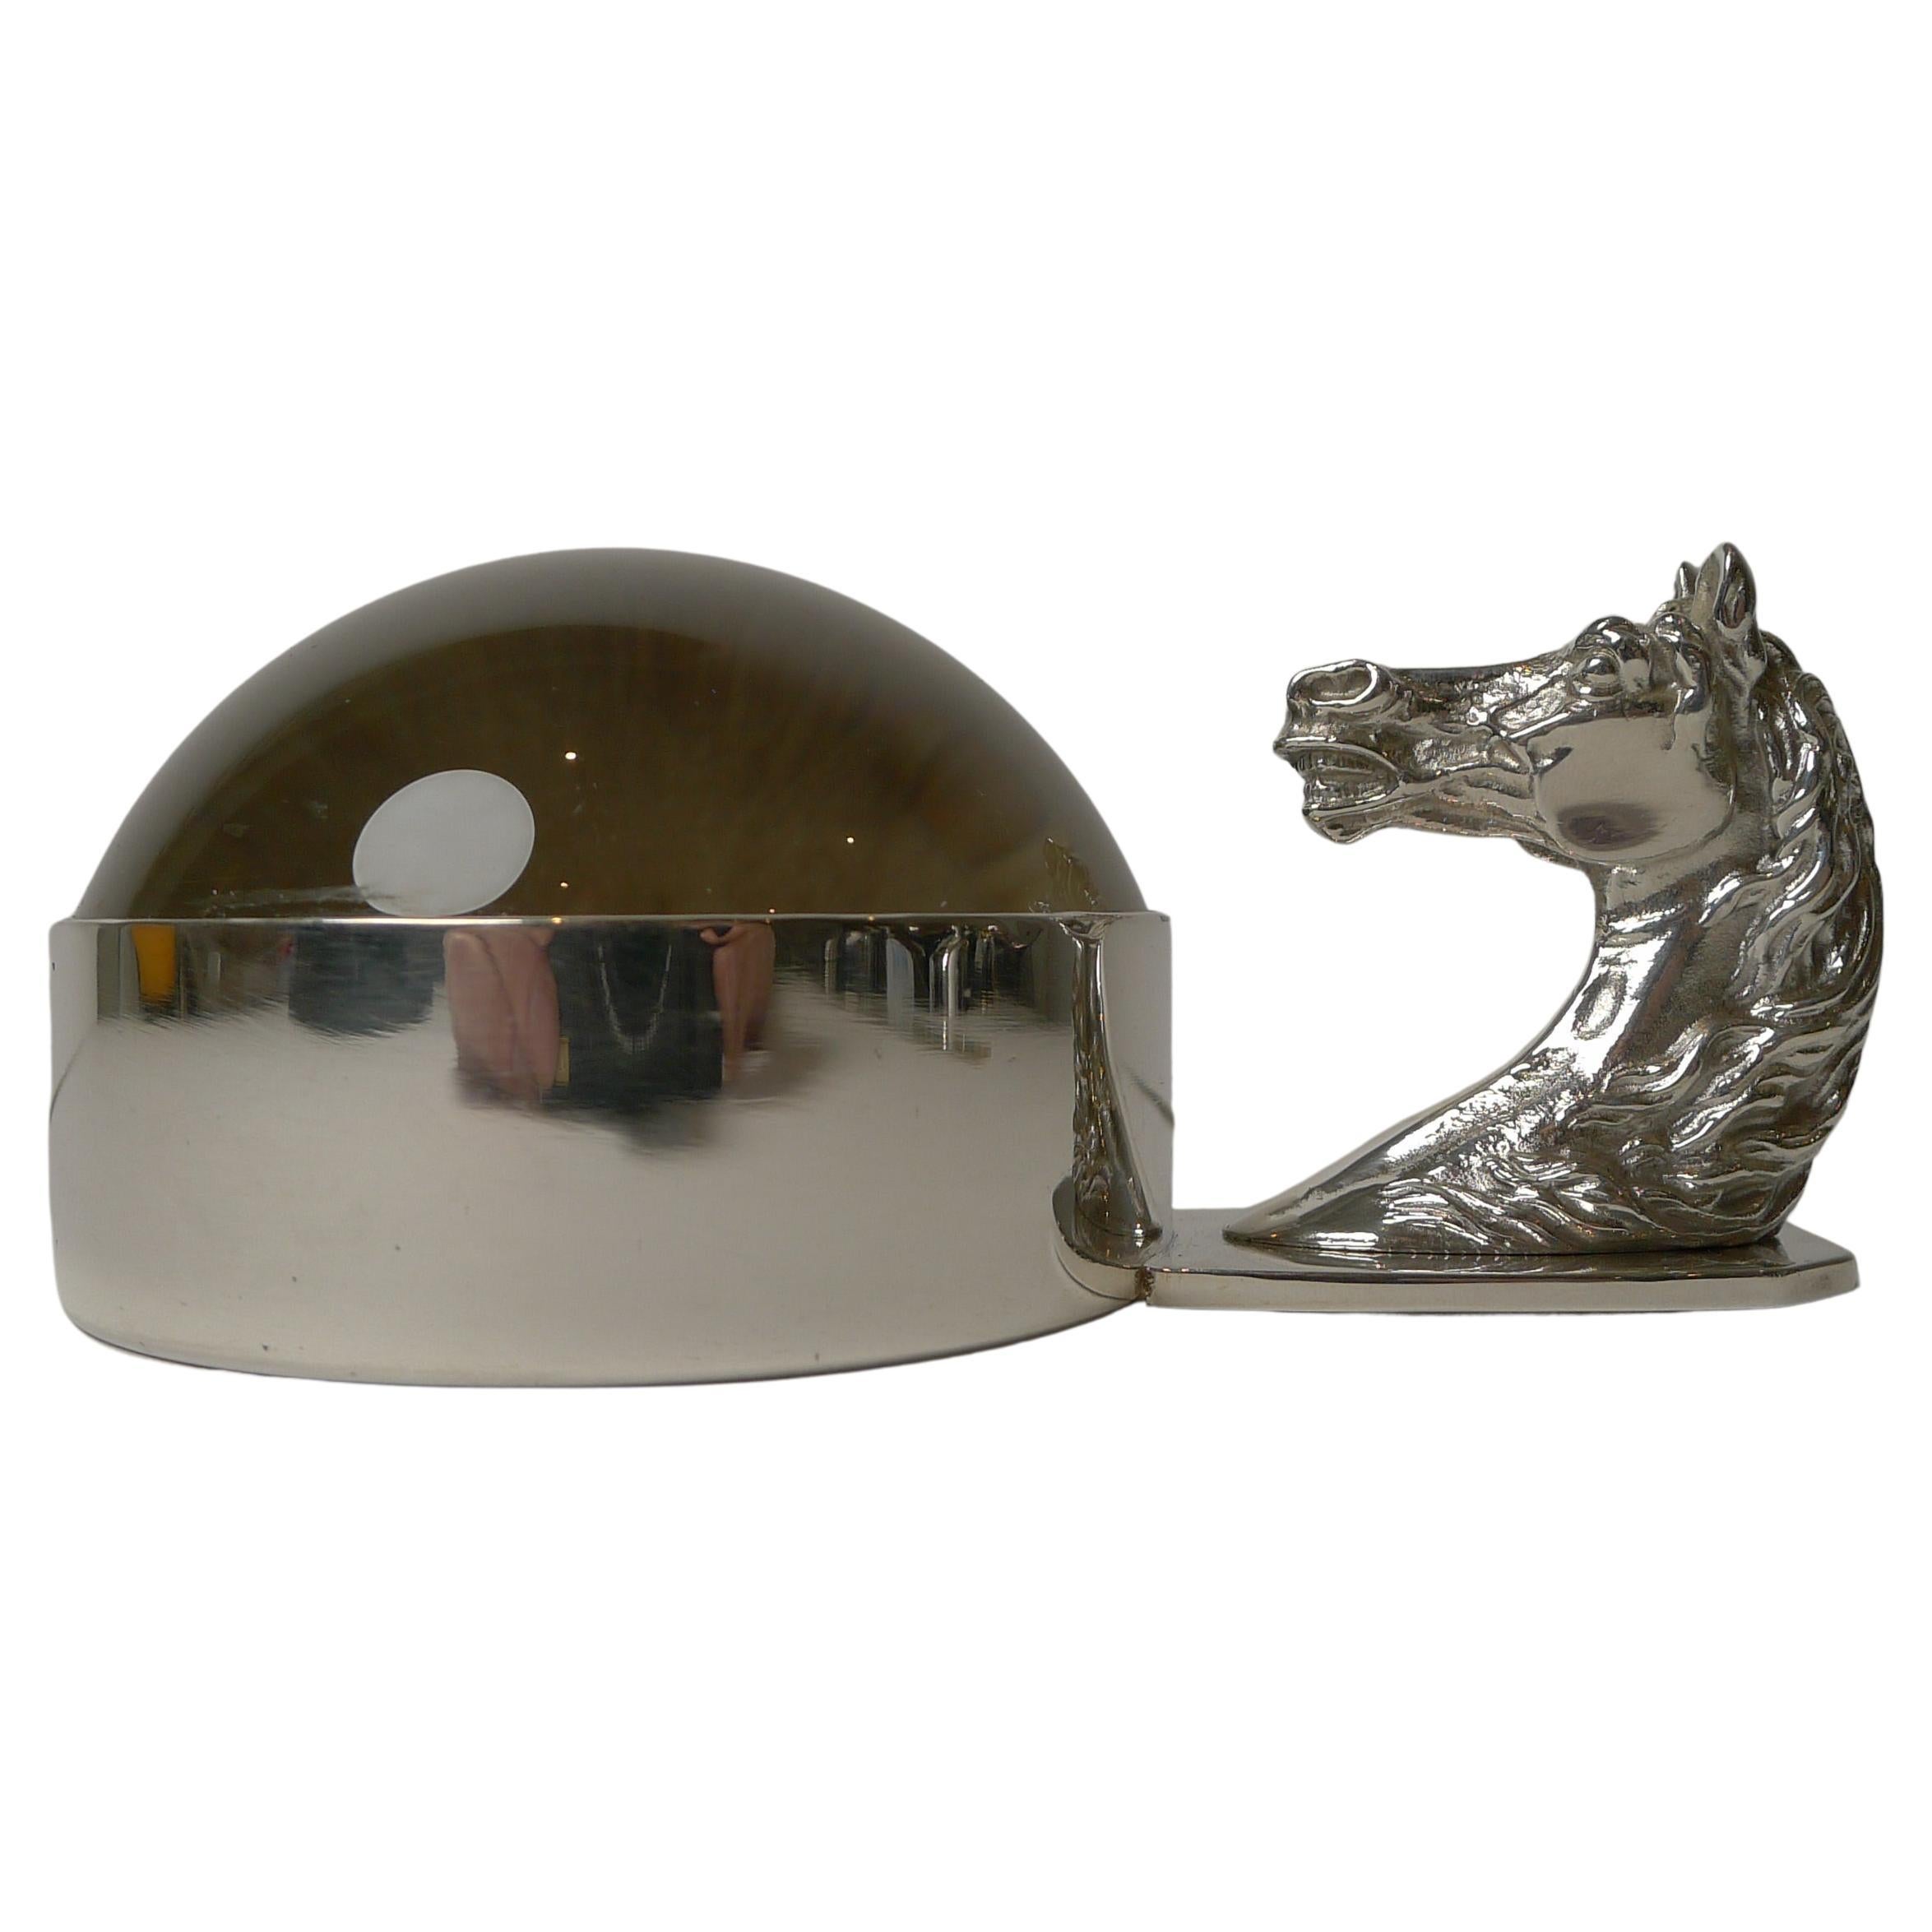 A magnificent and grand vintage desk-top magnifying glass / loupe made with it's beautifully cast Hermes Horse head handle, lovely quality to be expected from this most famous of luxury brands.

Stamped Hermes, Paris and Made in France either side